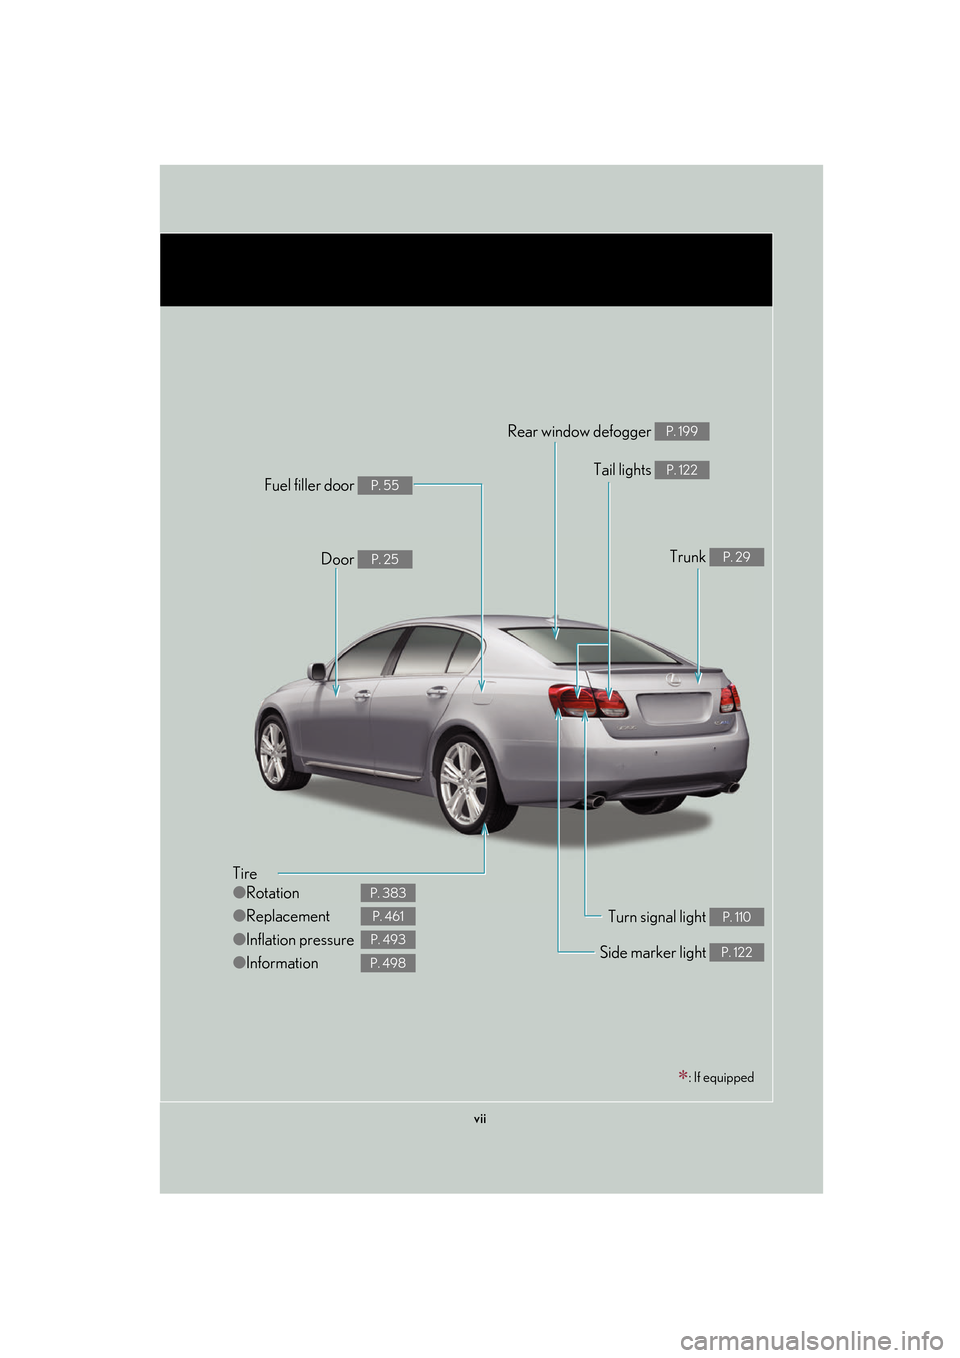 Lexus GS450h 2007  Do-it-yourself maintenance / LEXUS 2007 GS450H FROM JULY 2006 PROD. OWNERS MANUAL (OM30A05U) vii
Tire
●Rotation
● Replacement
● Inflation pressure
● Information
P. 383
P. 461
P. 493
P. 498
Tail lights P. 122
Side marker light P. 122
Trunk P. 29
Rear window defogger P. 199
Door P. 25
F